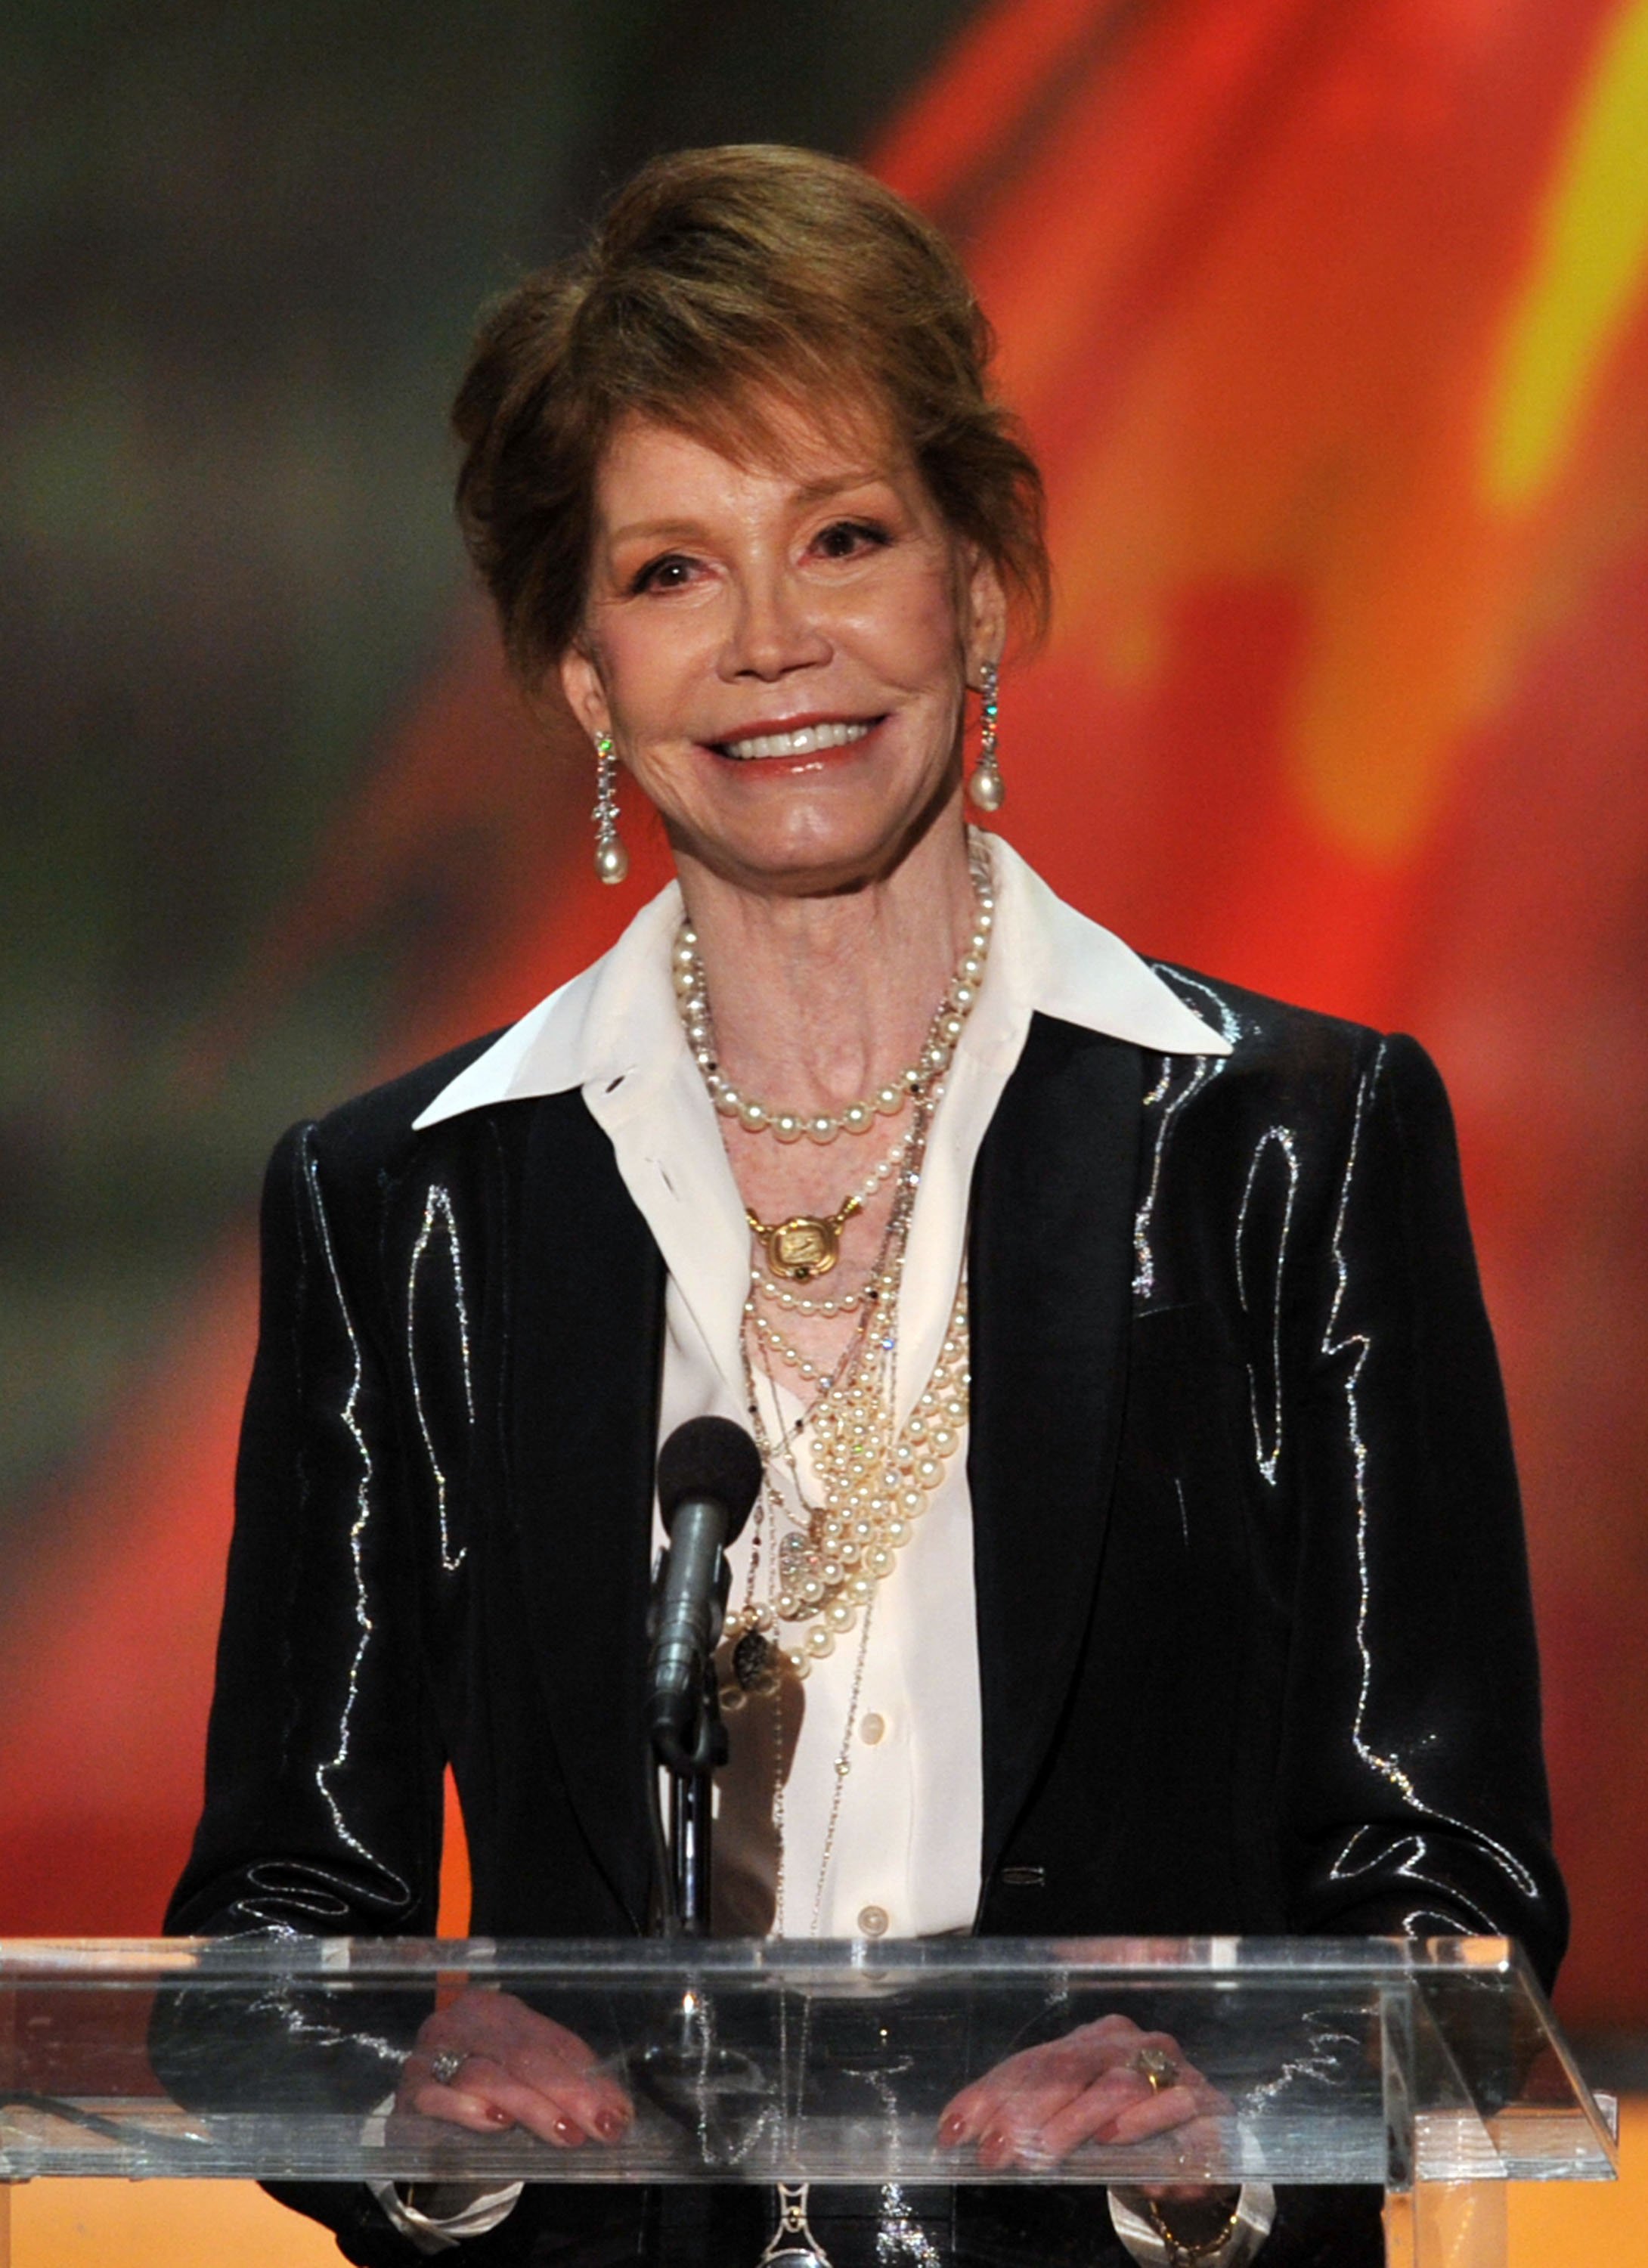 Mary Tyler Moore accepts the Life Achievement Award on January 29, 2012, in Los Angeles, California | Photo: Getty Images.